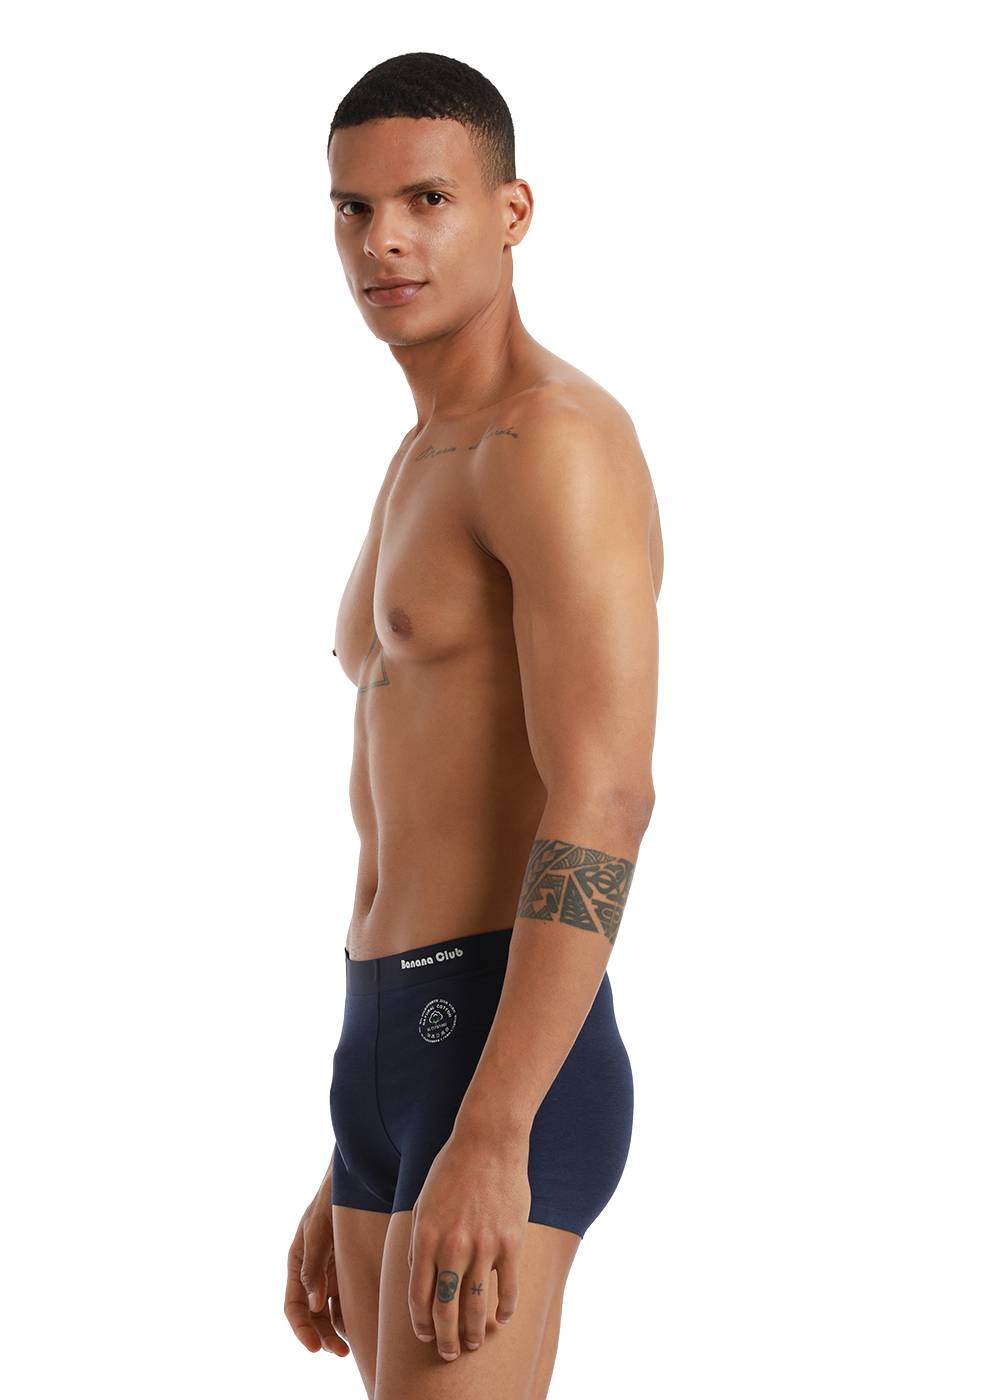 Navy Blue Low Rise Trunk